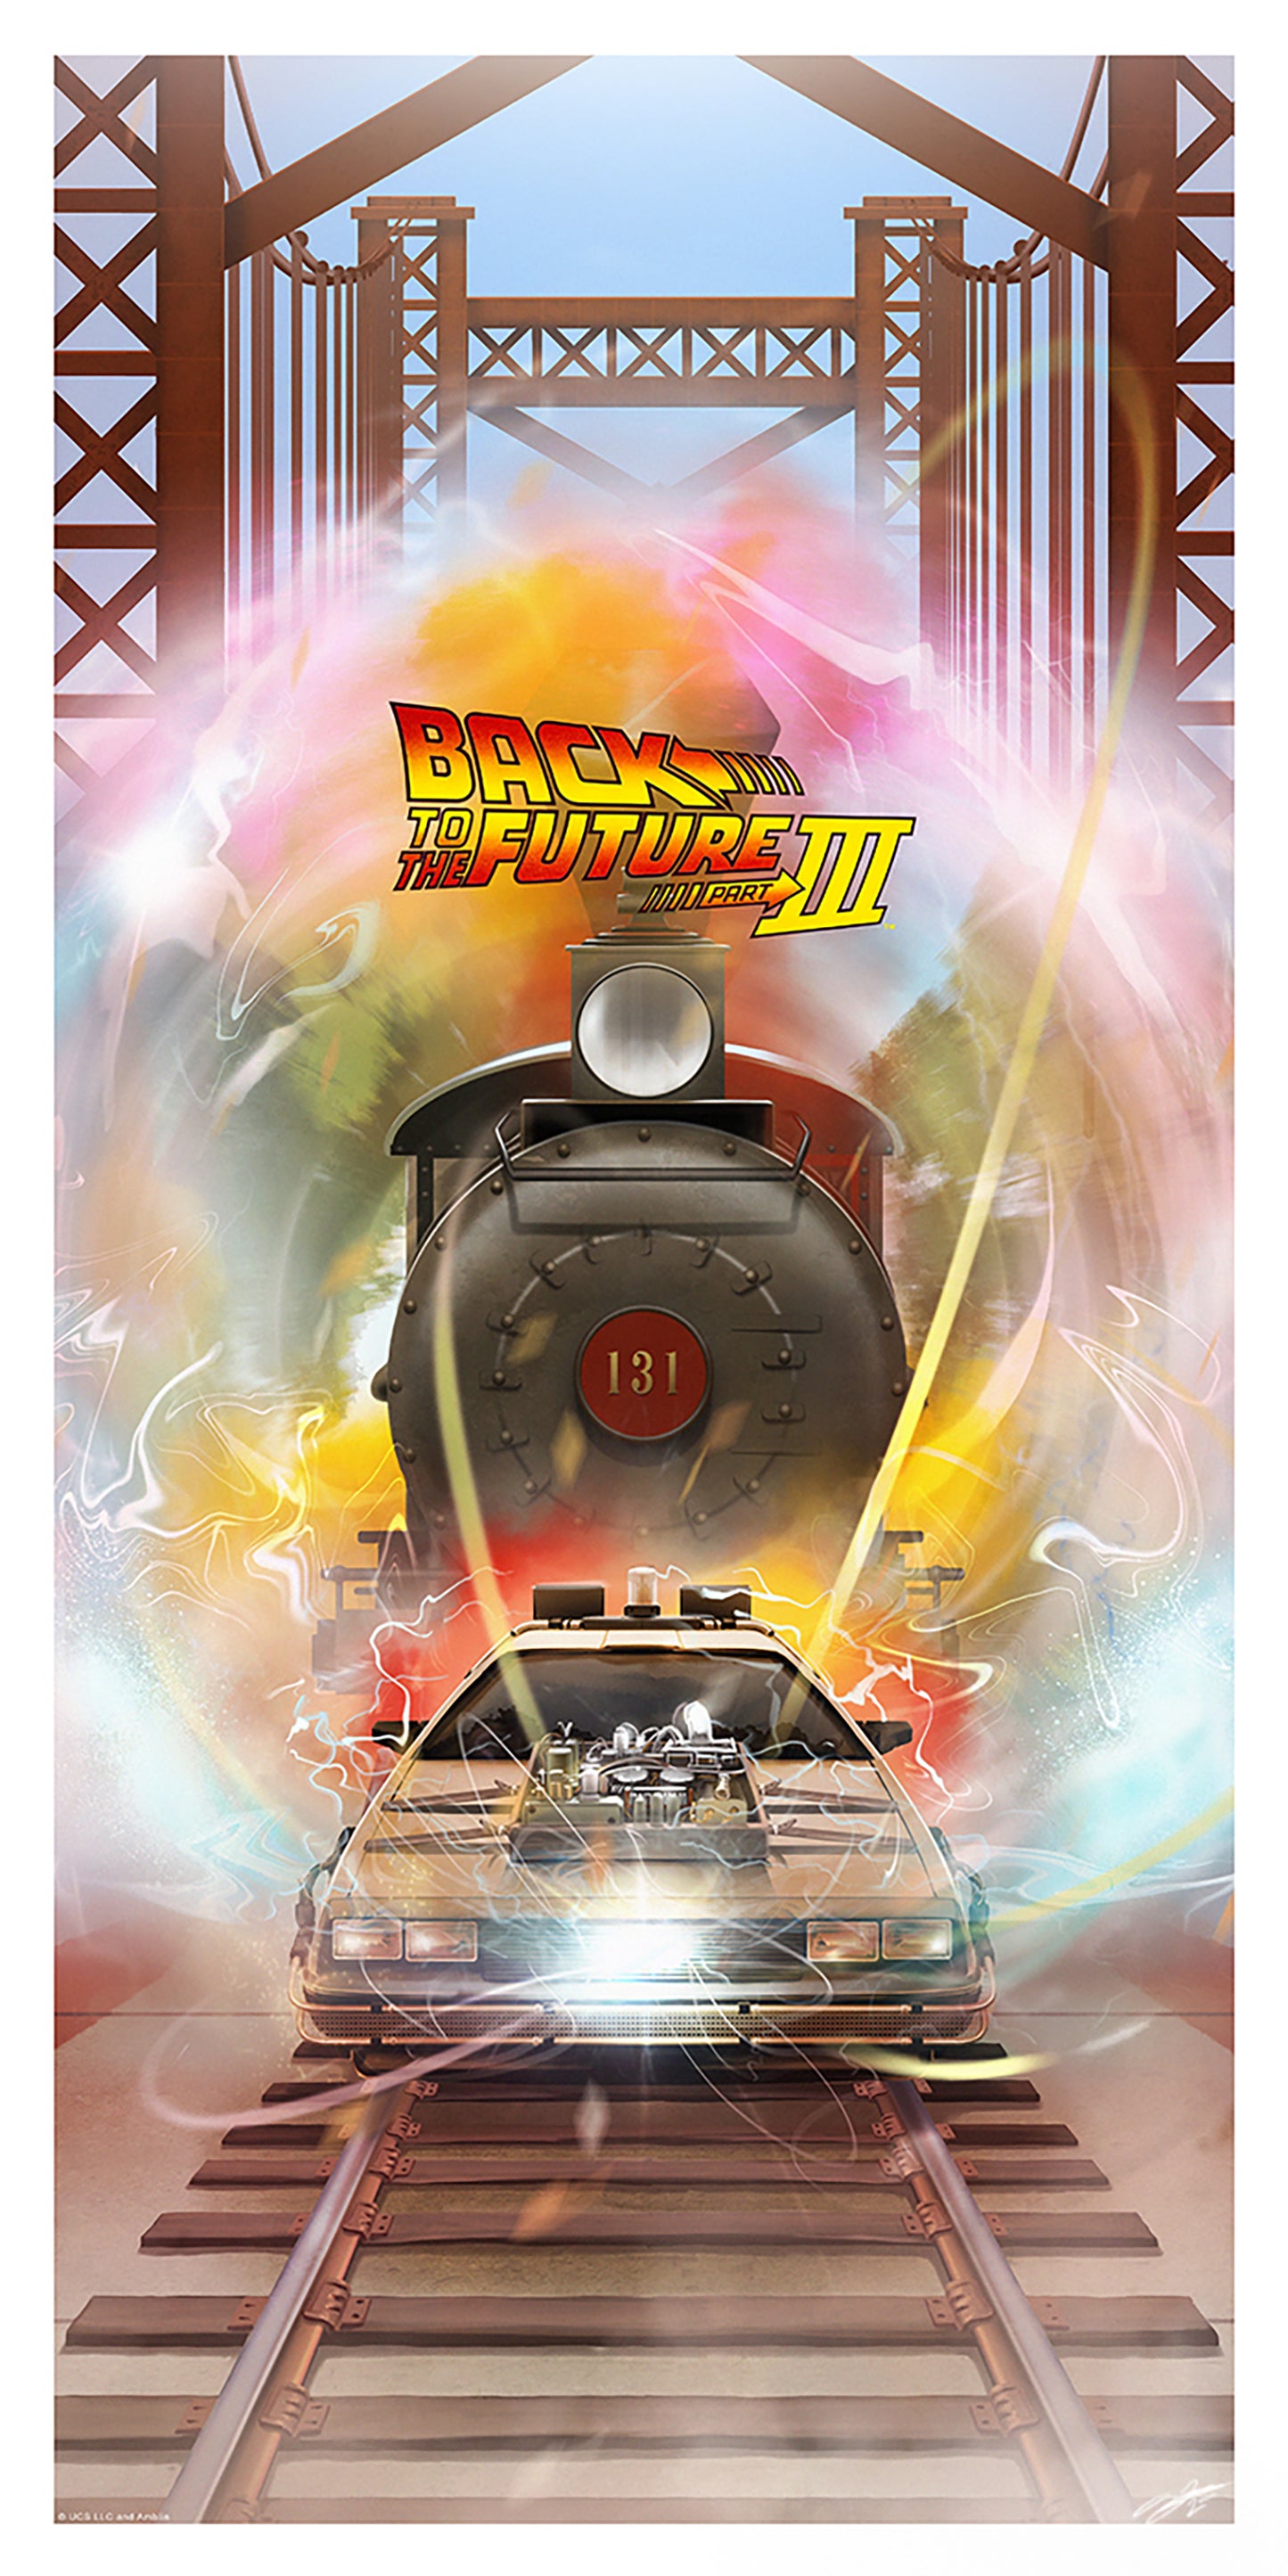 Andy Fairhurst "Back to the Future: Trilogy" SET